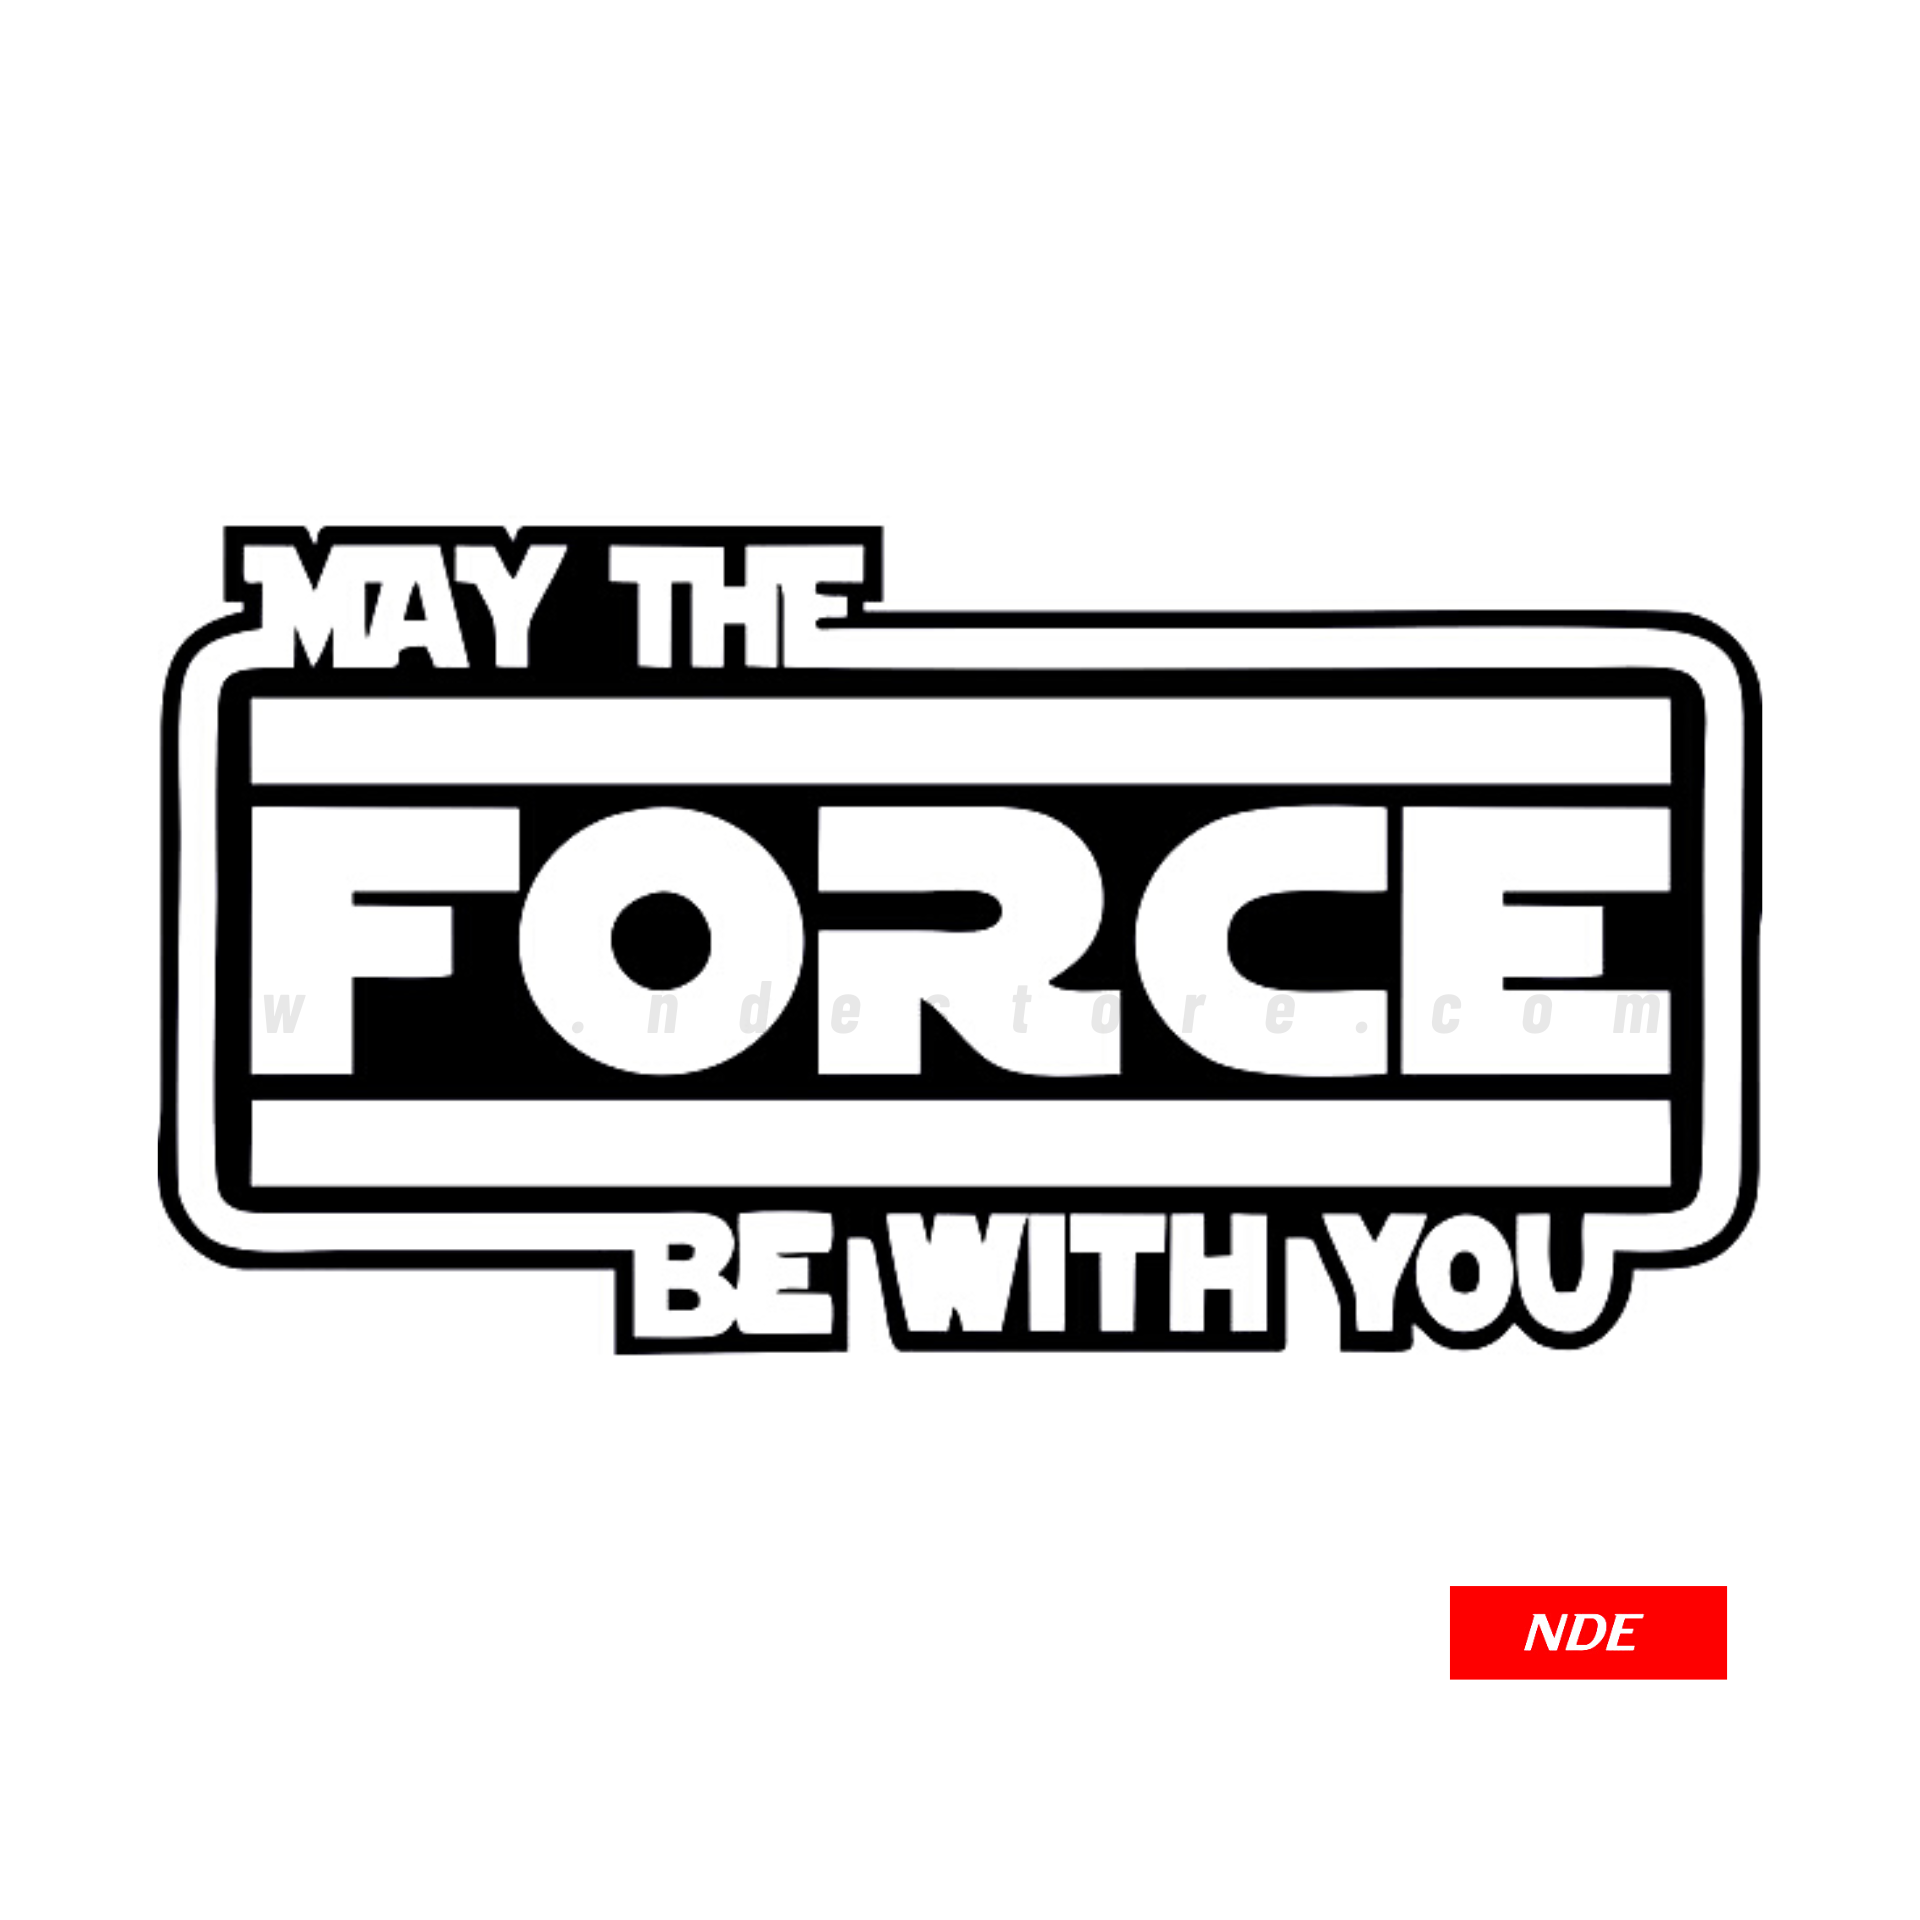 STICKER, STARWARS MAY THE FORCE BE WITH YOU d2